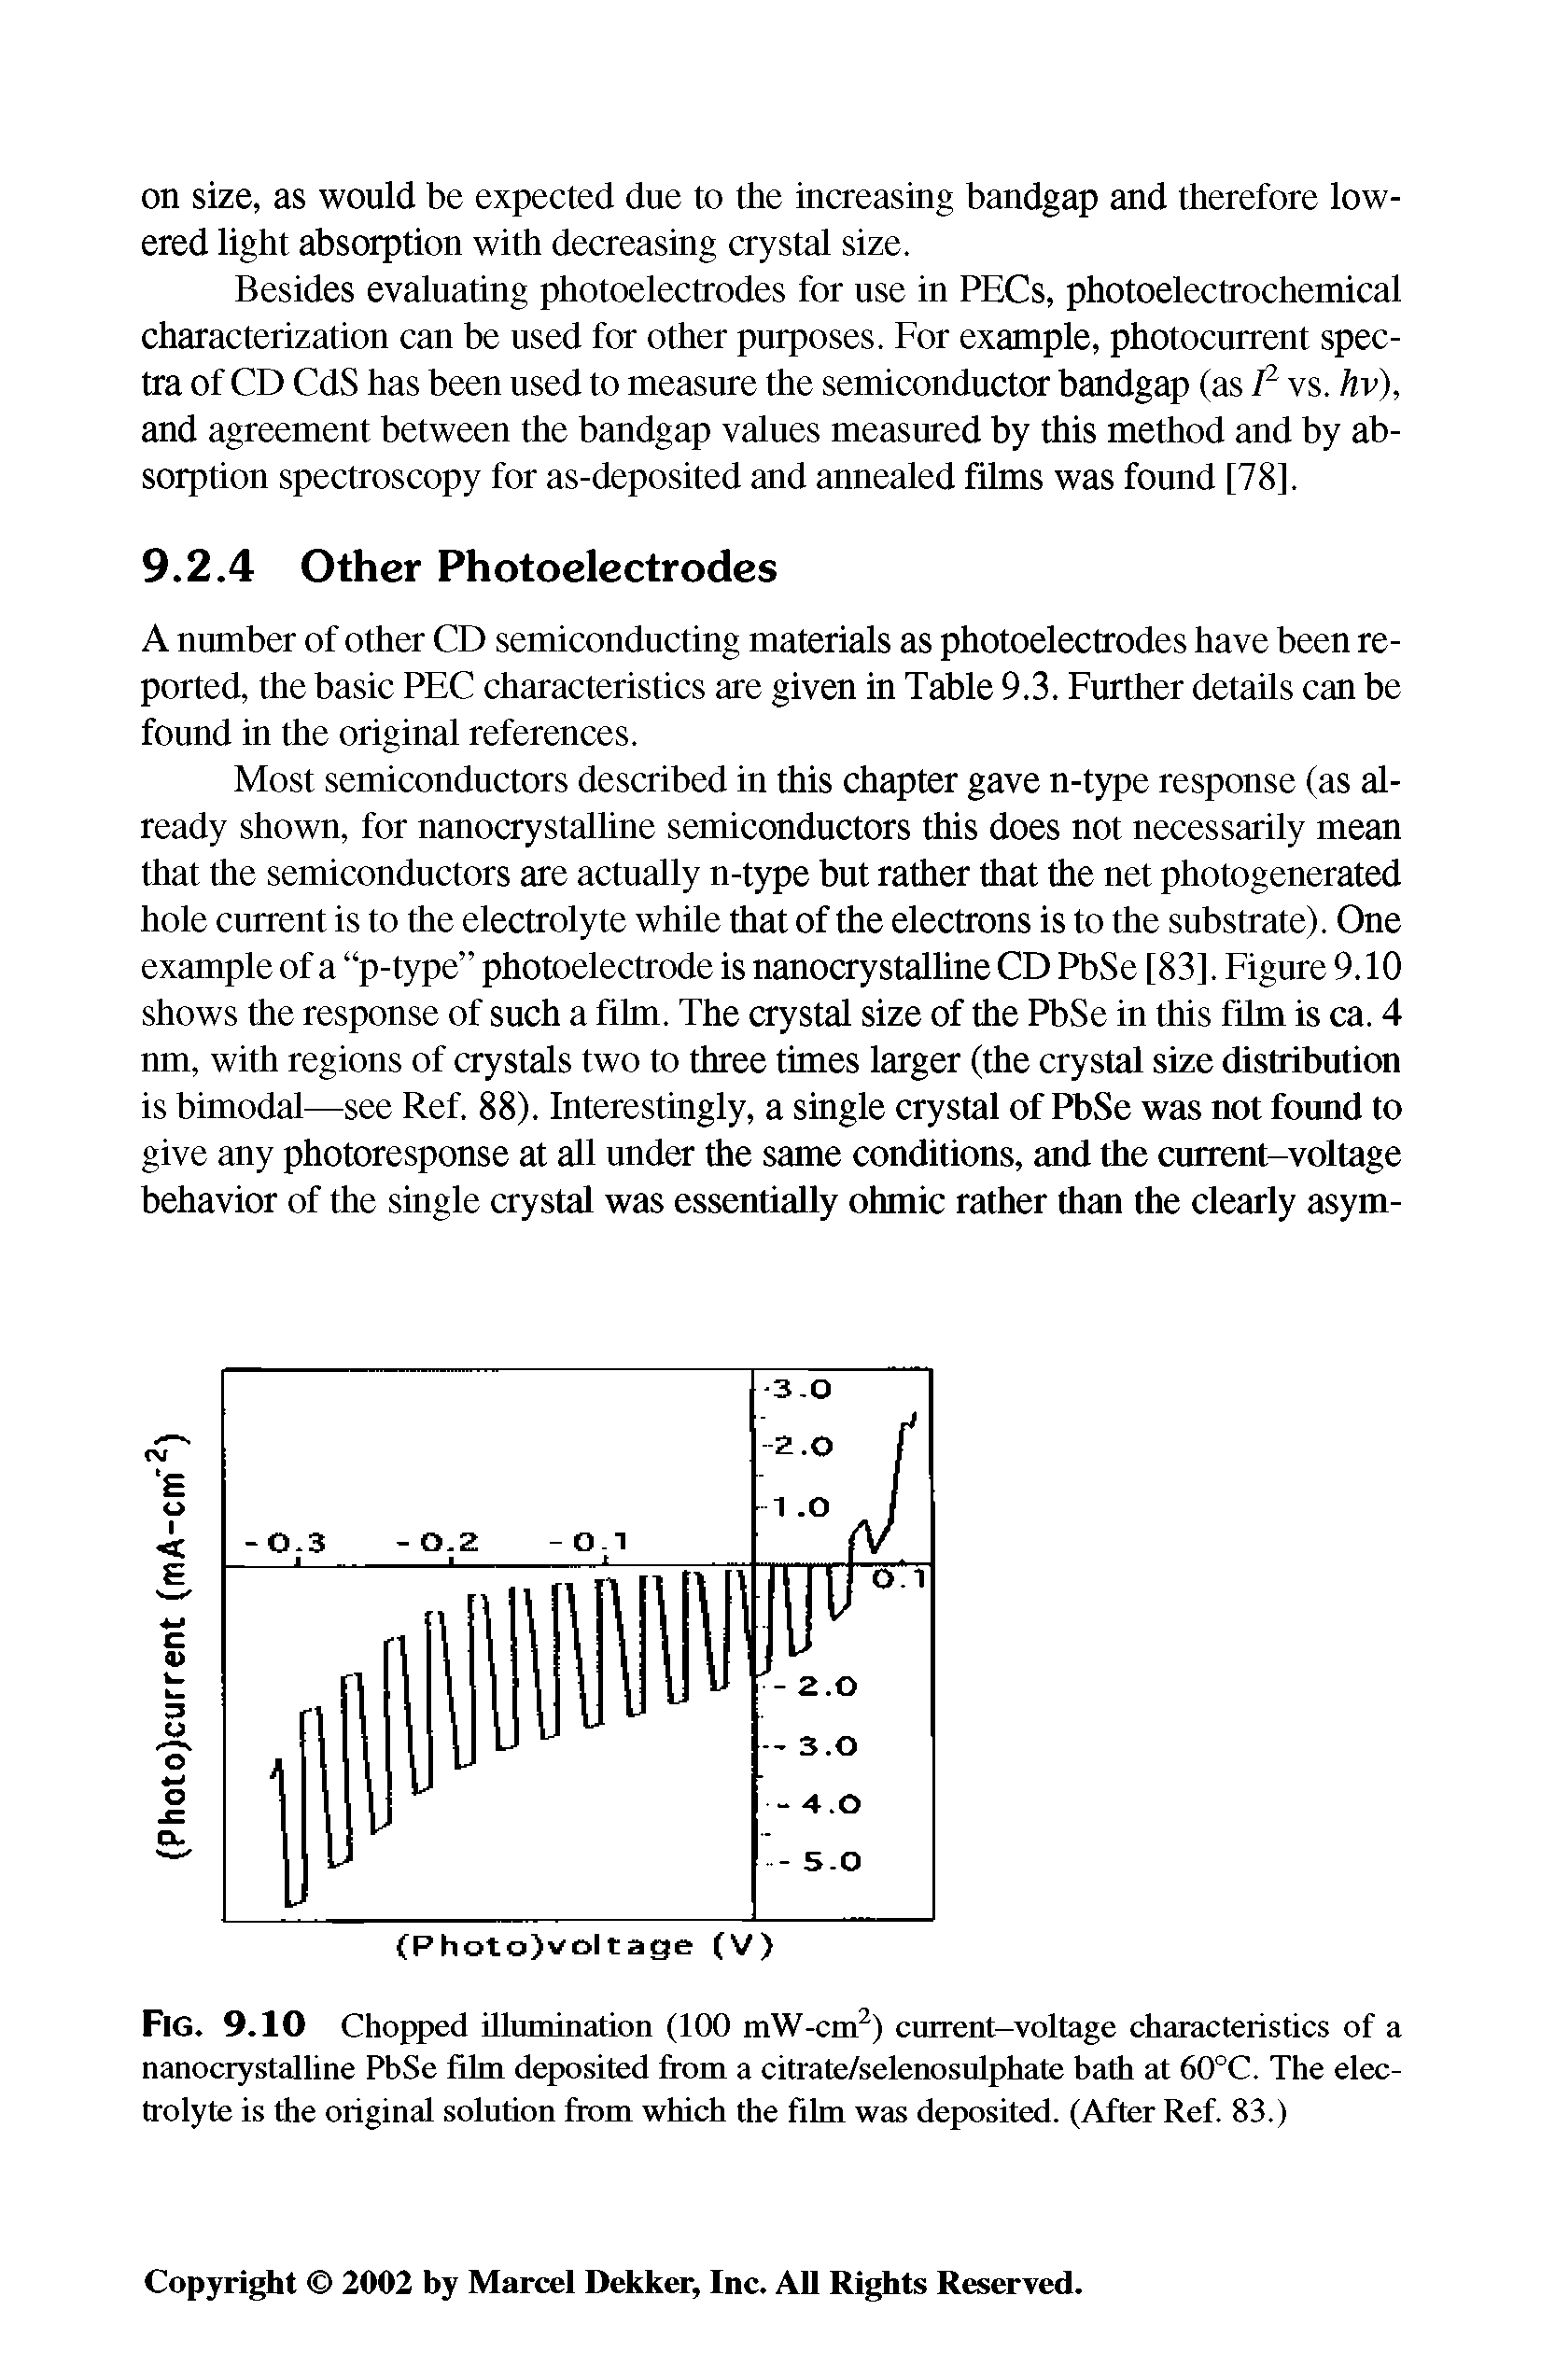 Fig. 9.10 Chopped illumination (100 mW-cm ) current-voltage characteristics of a nanocrystalline PbSe fihn deposited from a citrate/selenosulphate bath at 60°C. The electrolyte is the original solution from which the film was deposited. (After Ref. 83.)...